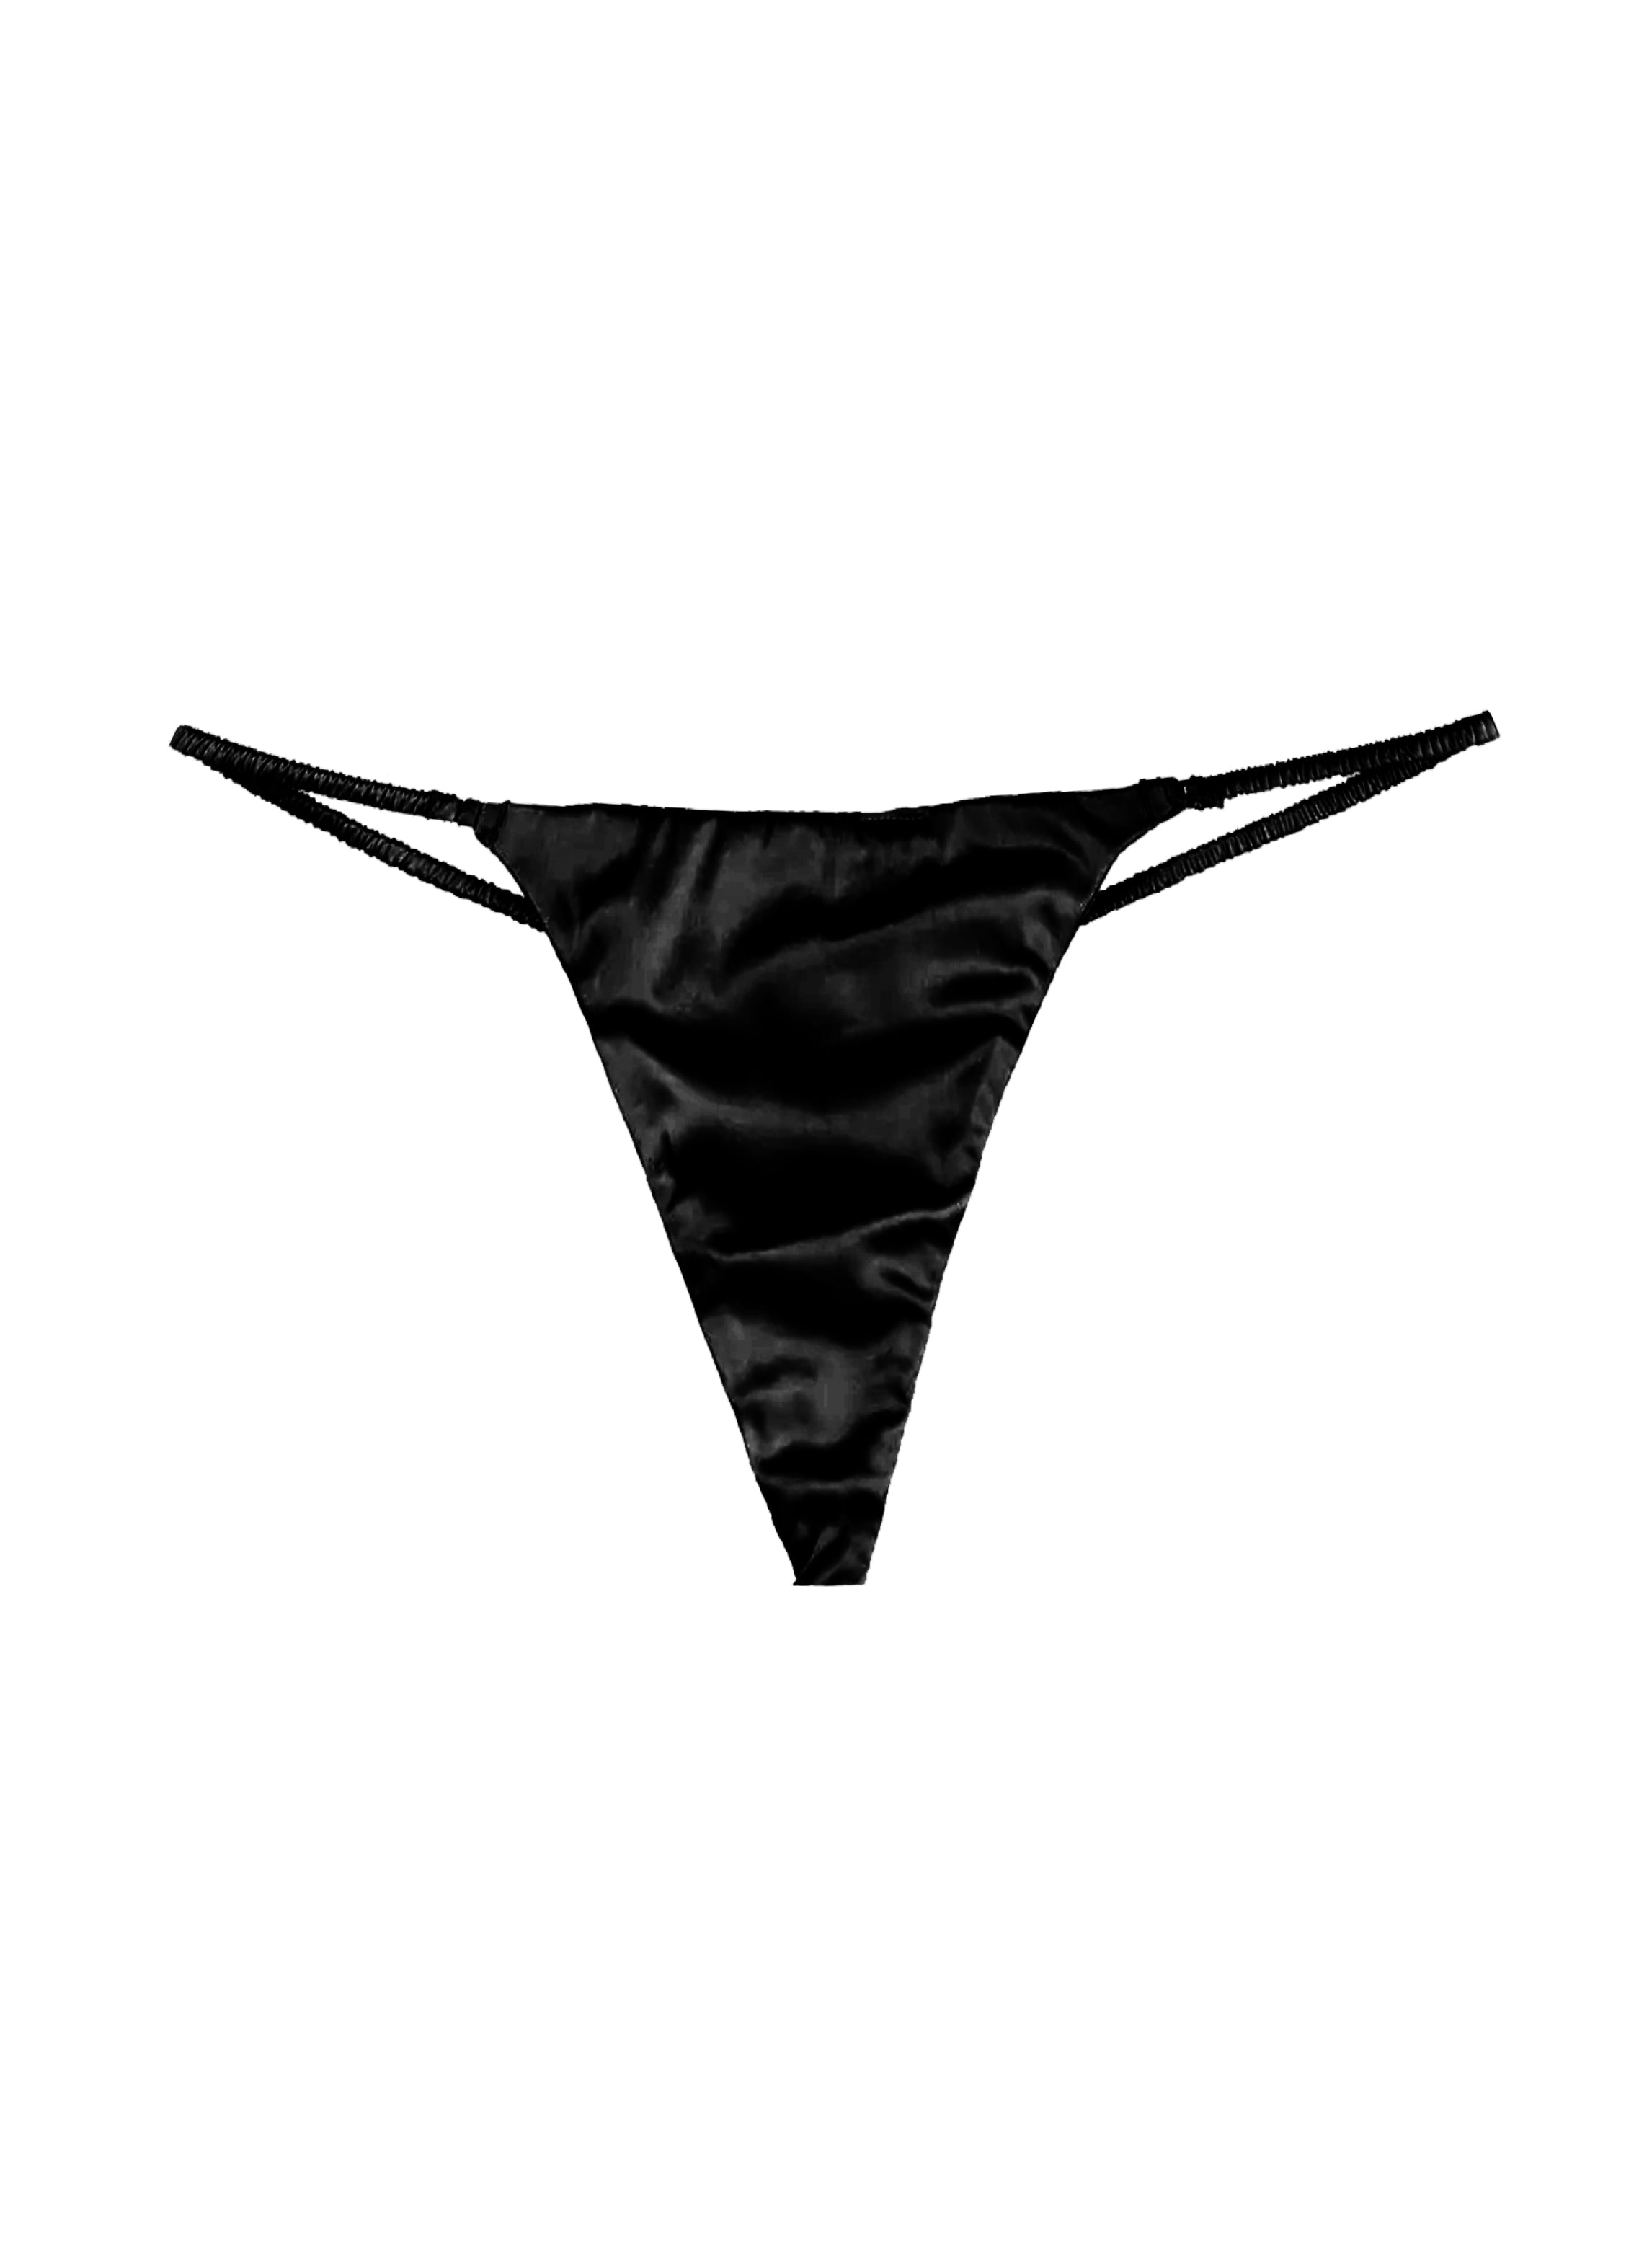 Thongs & V-String Panties - polyester - women - Shop your favorite brands